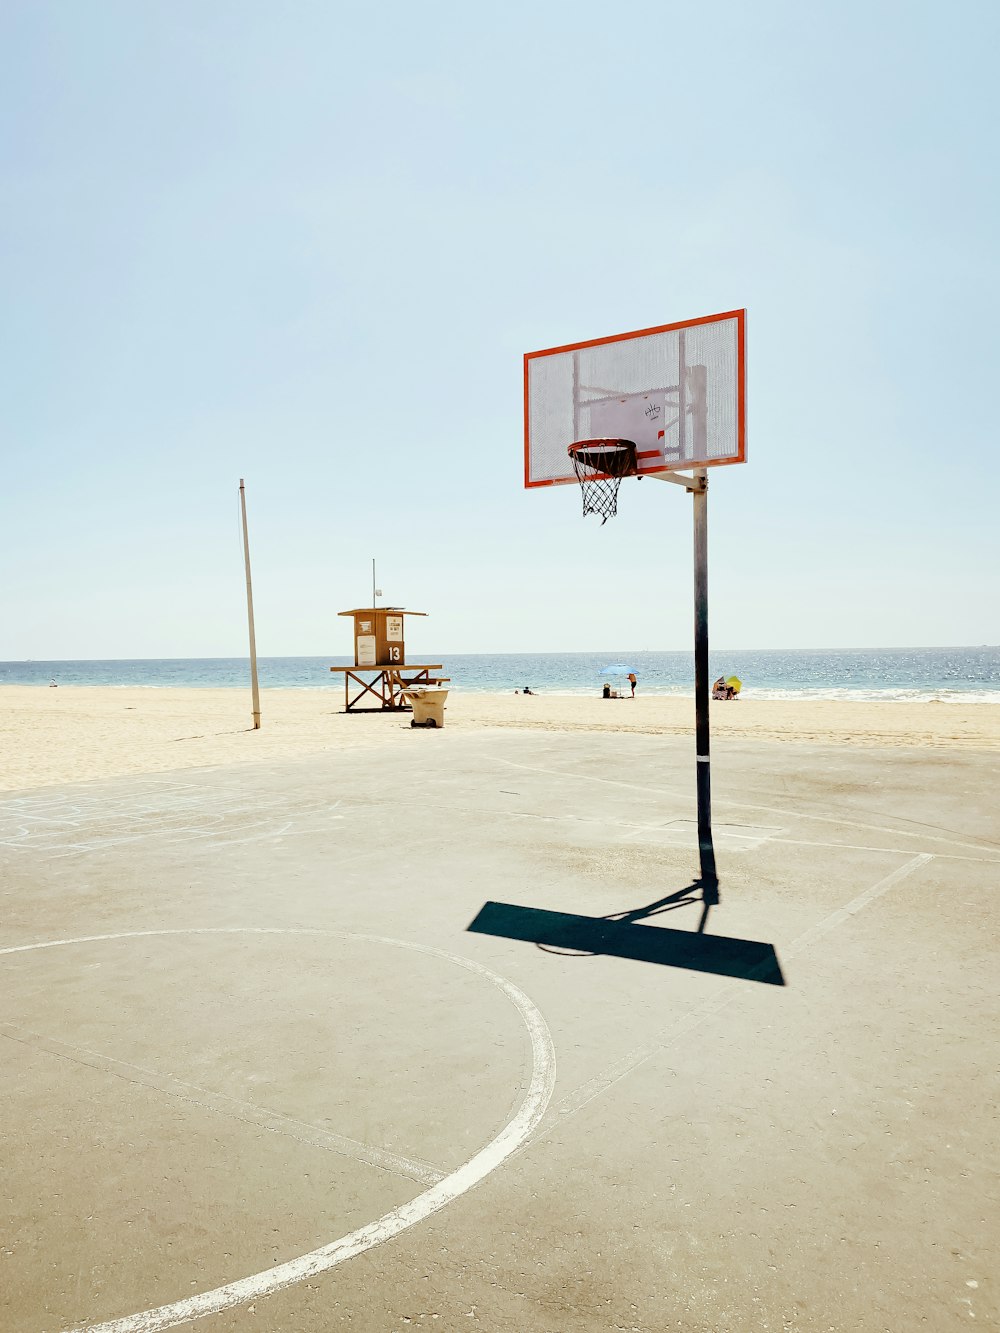 a basketball hoop on the beach with a lifeguard stand in the background